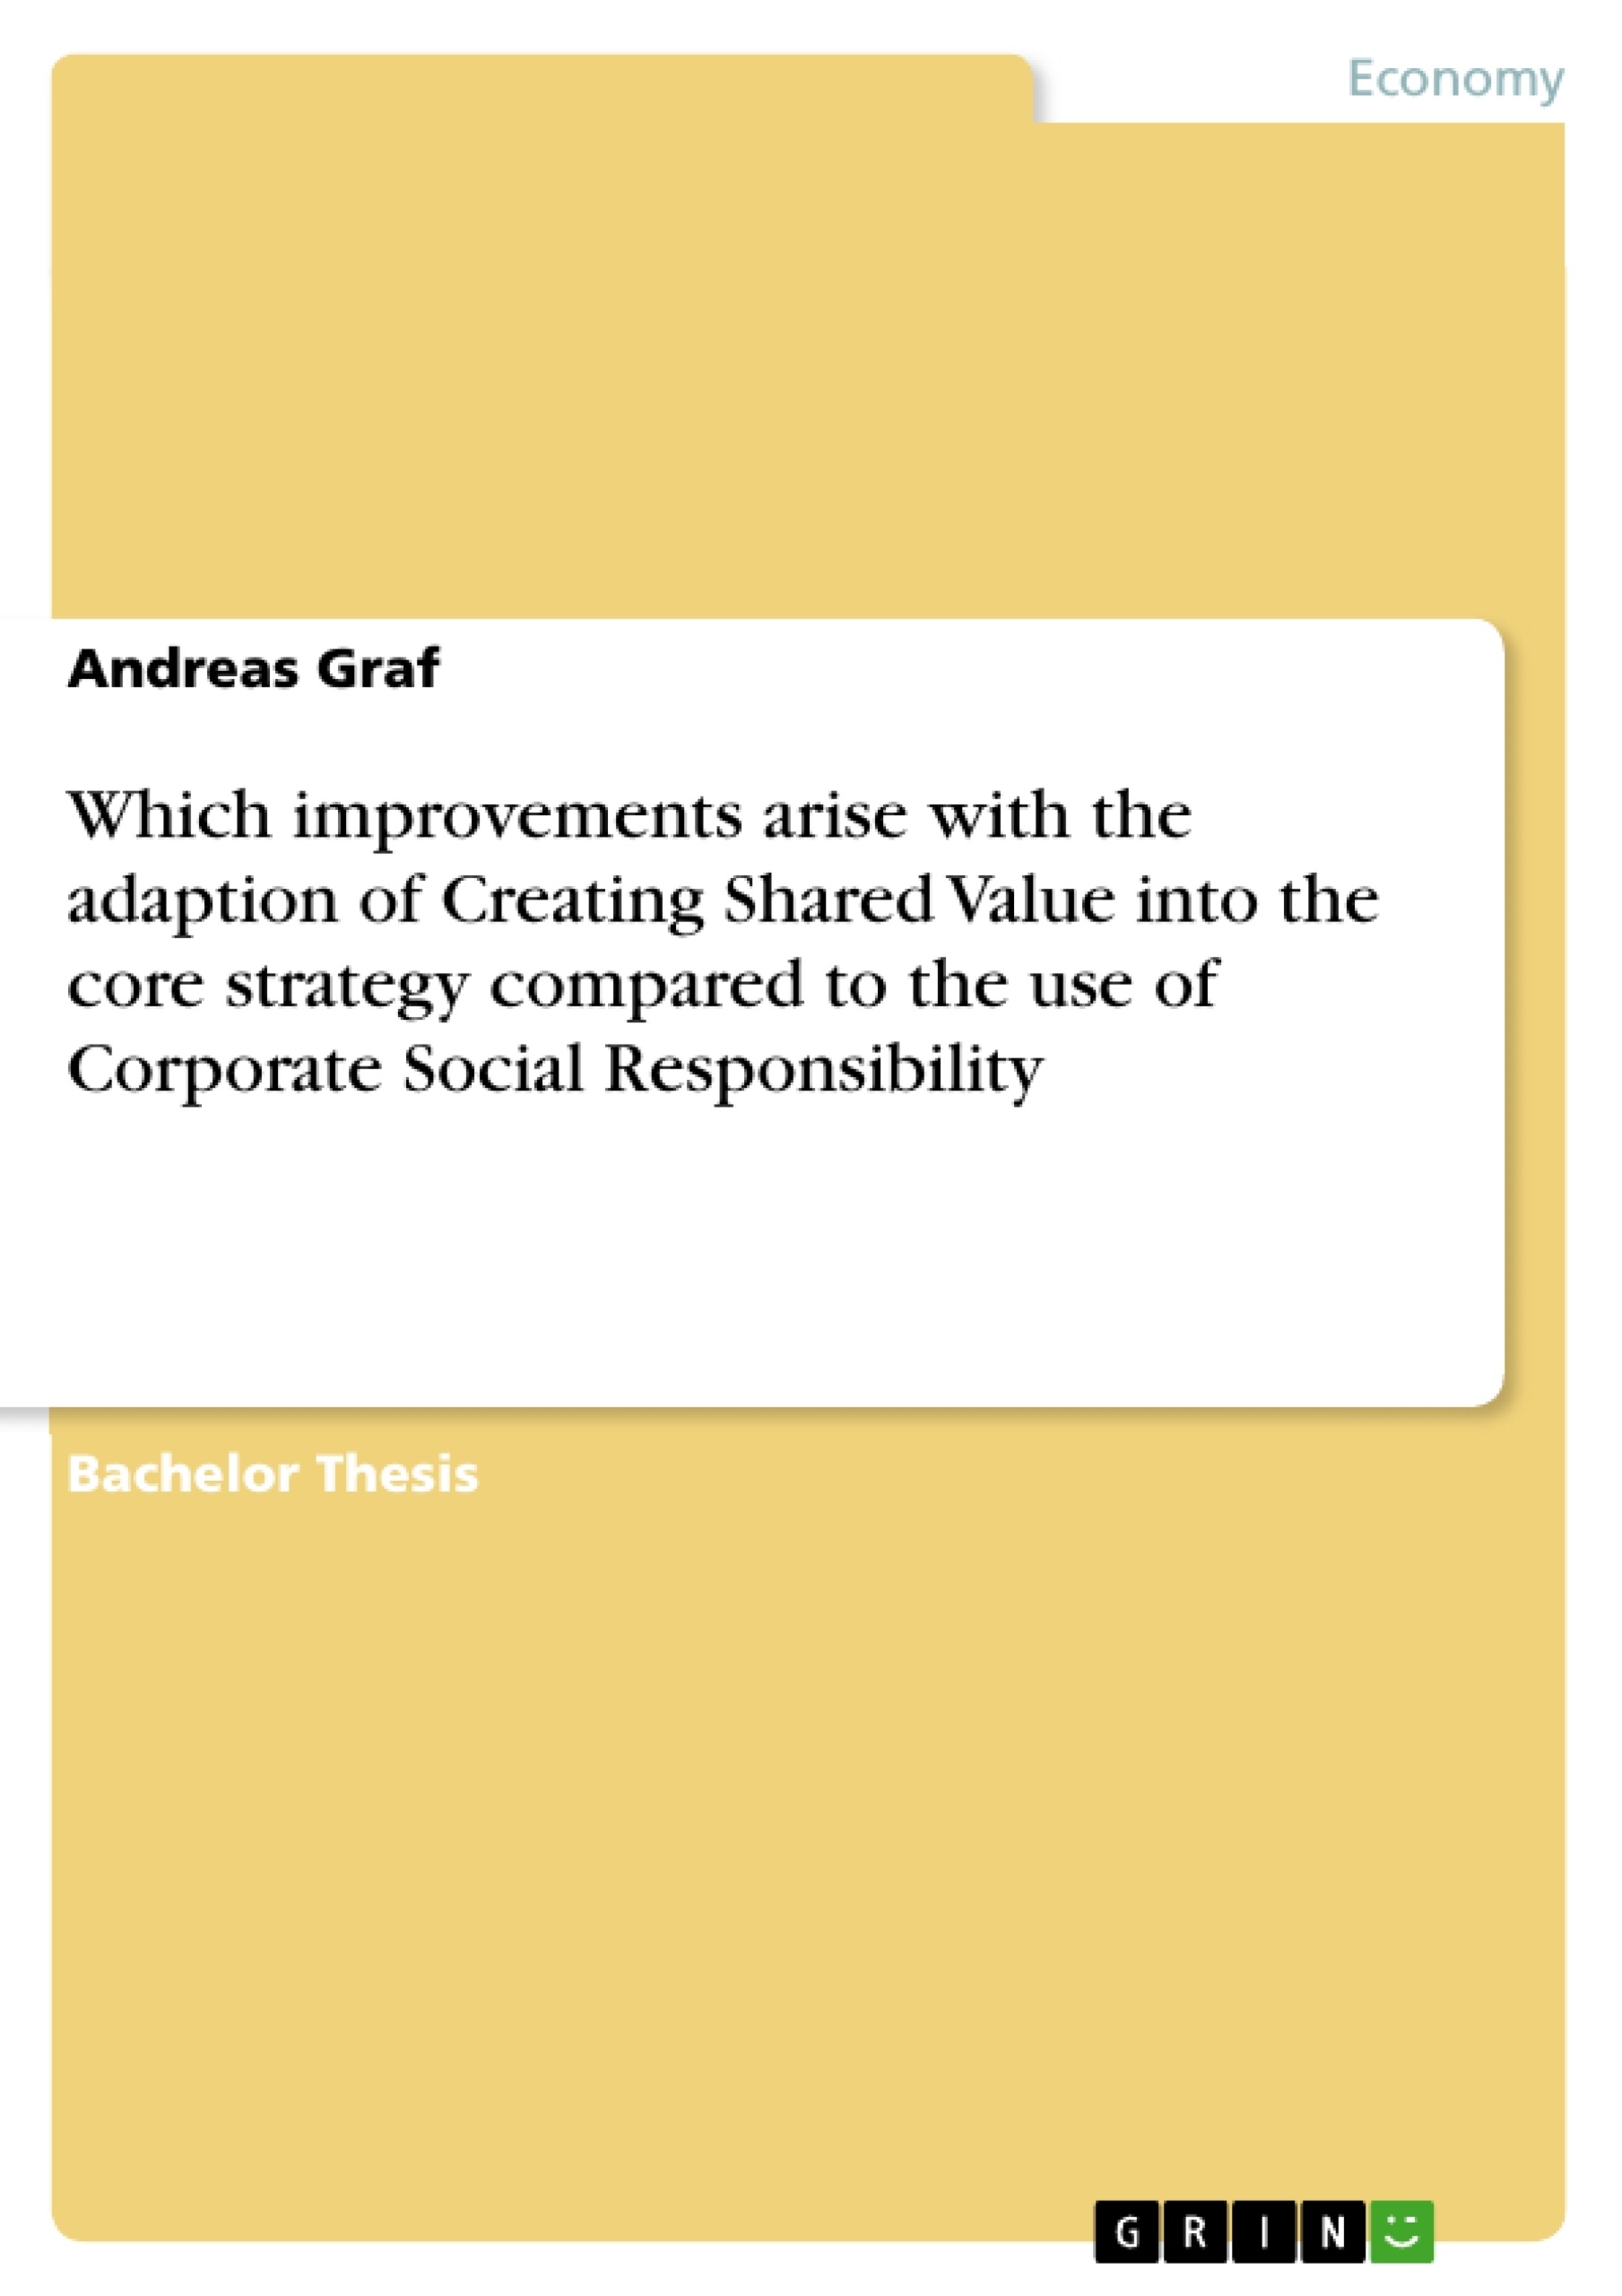 Title: Which improvements arise with the adaption of Creating Shared Value into the core strategy compared to the use of Corporate Social Responsibility